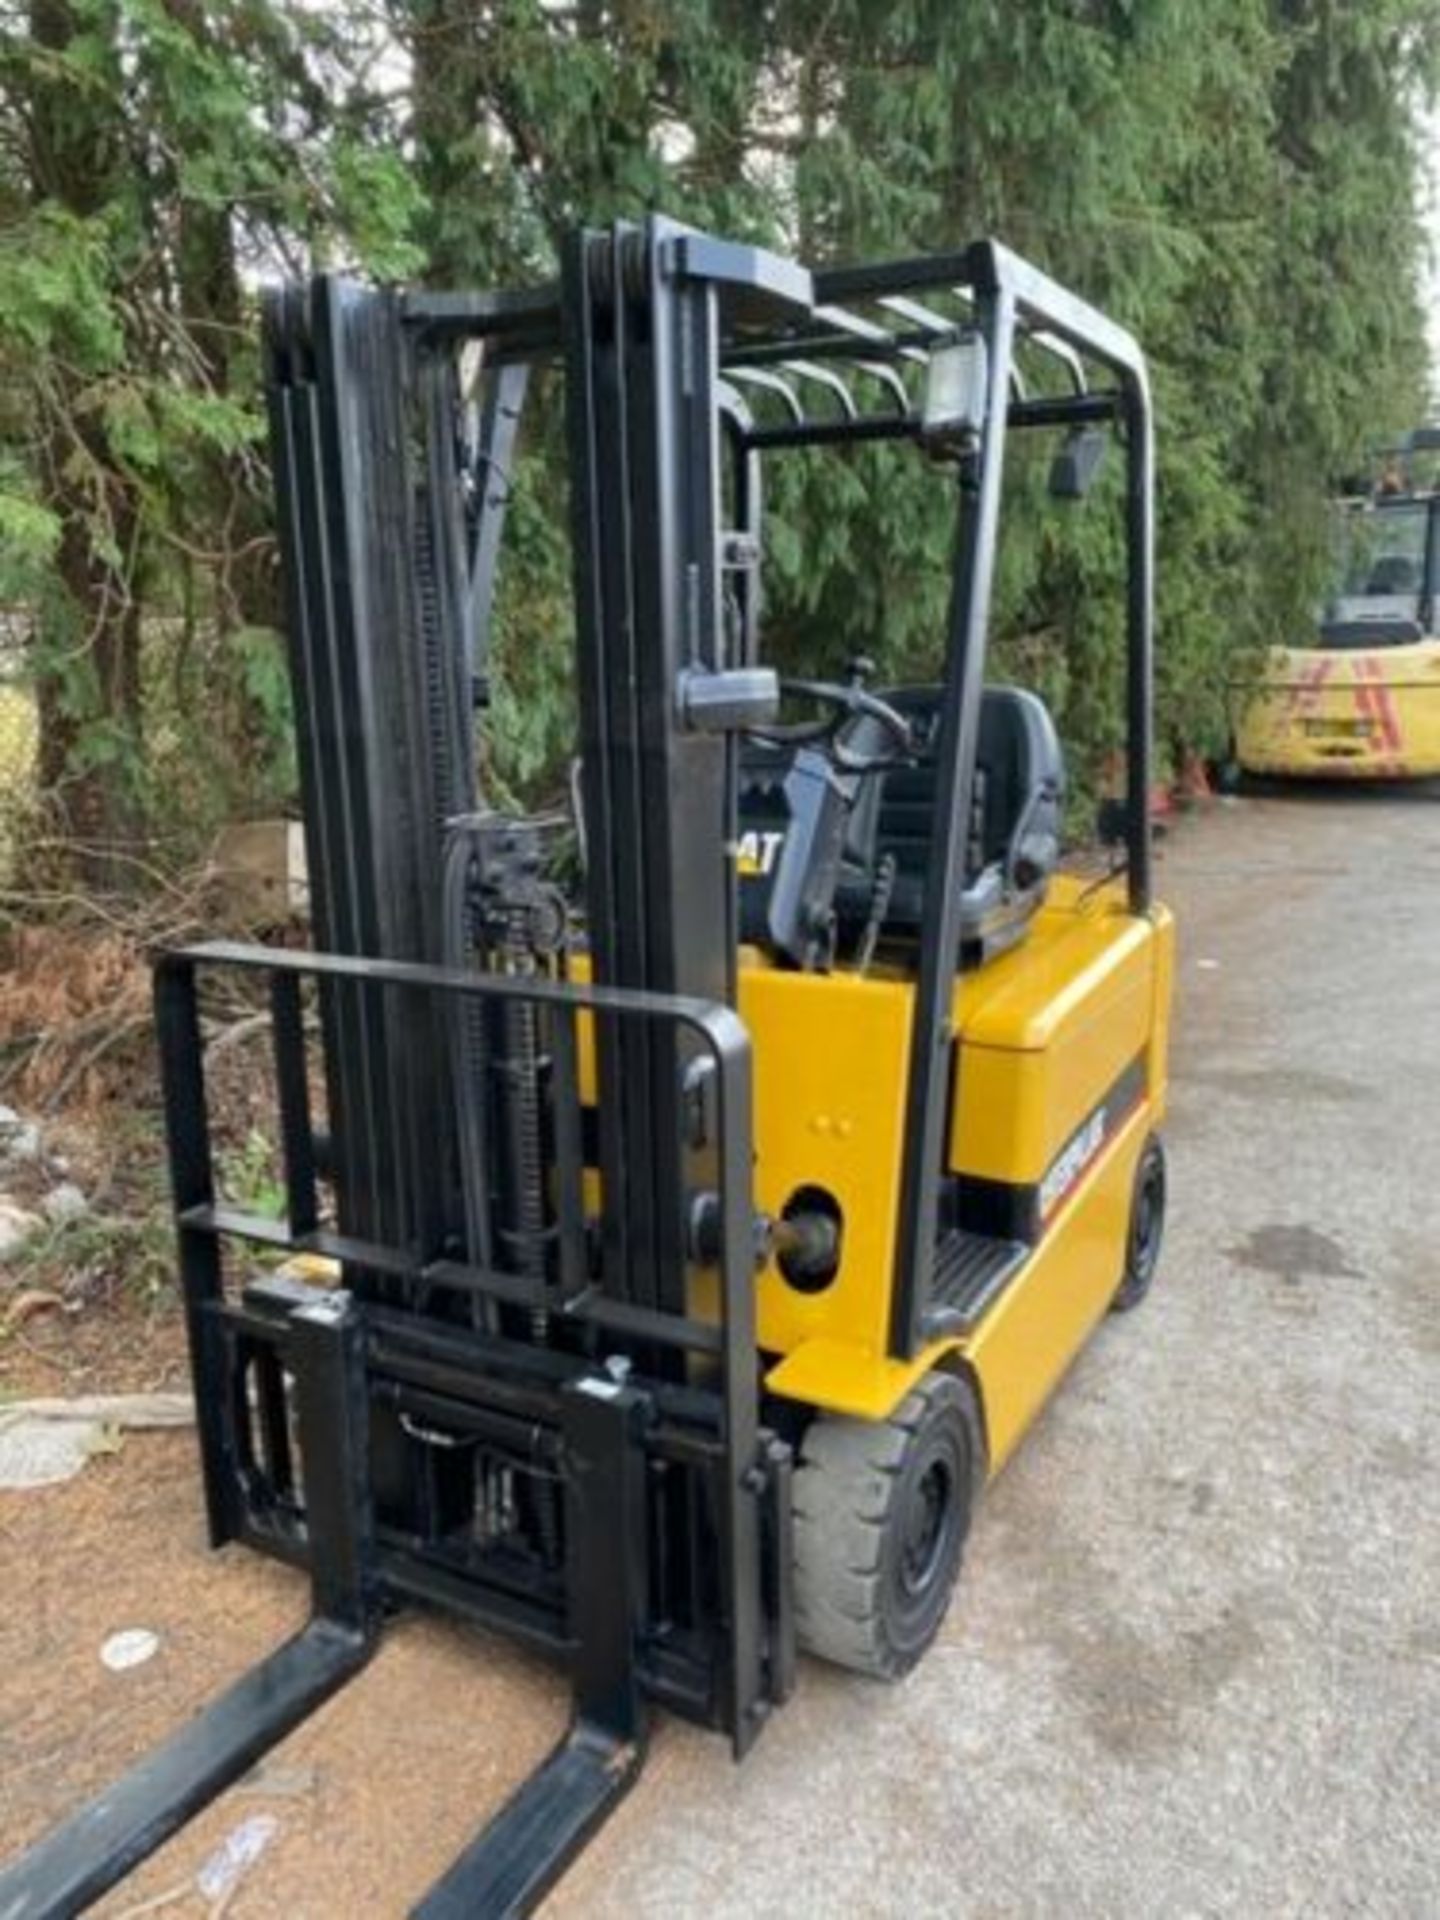 Caterpillar 1.6 tonne Electric Forklift, - Image 5 of 6